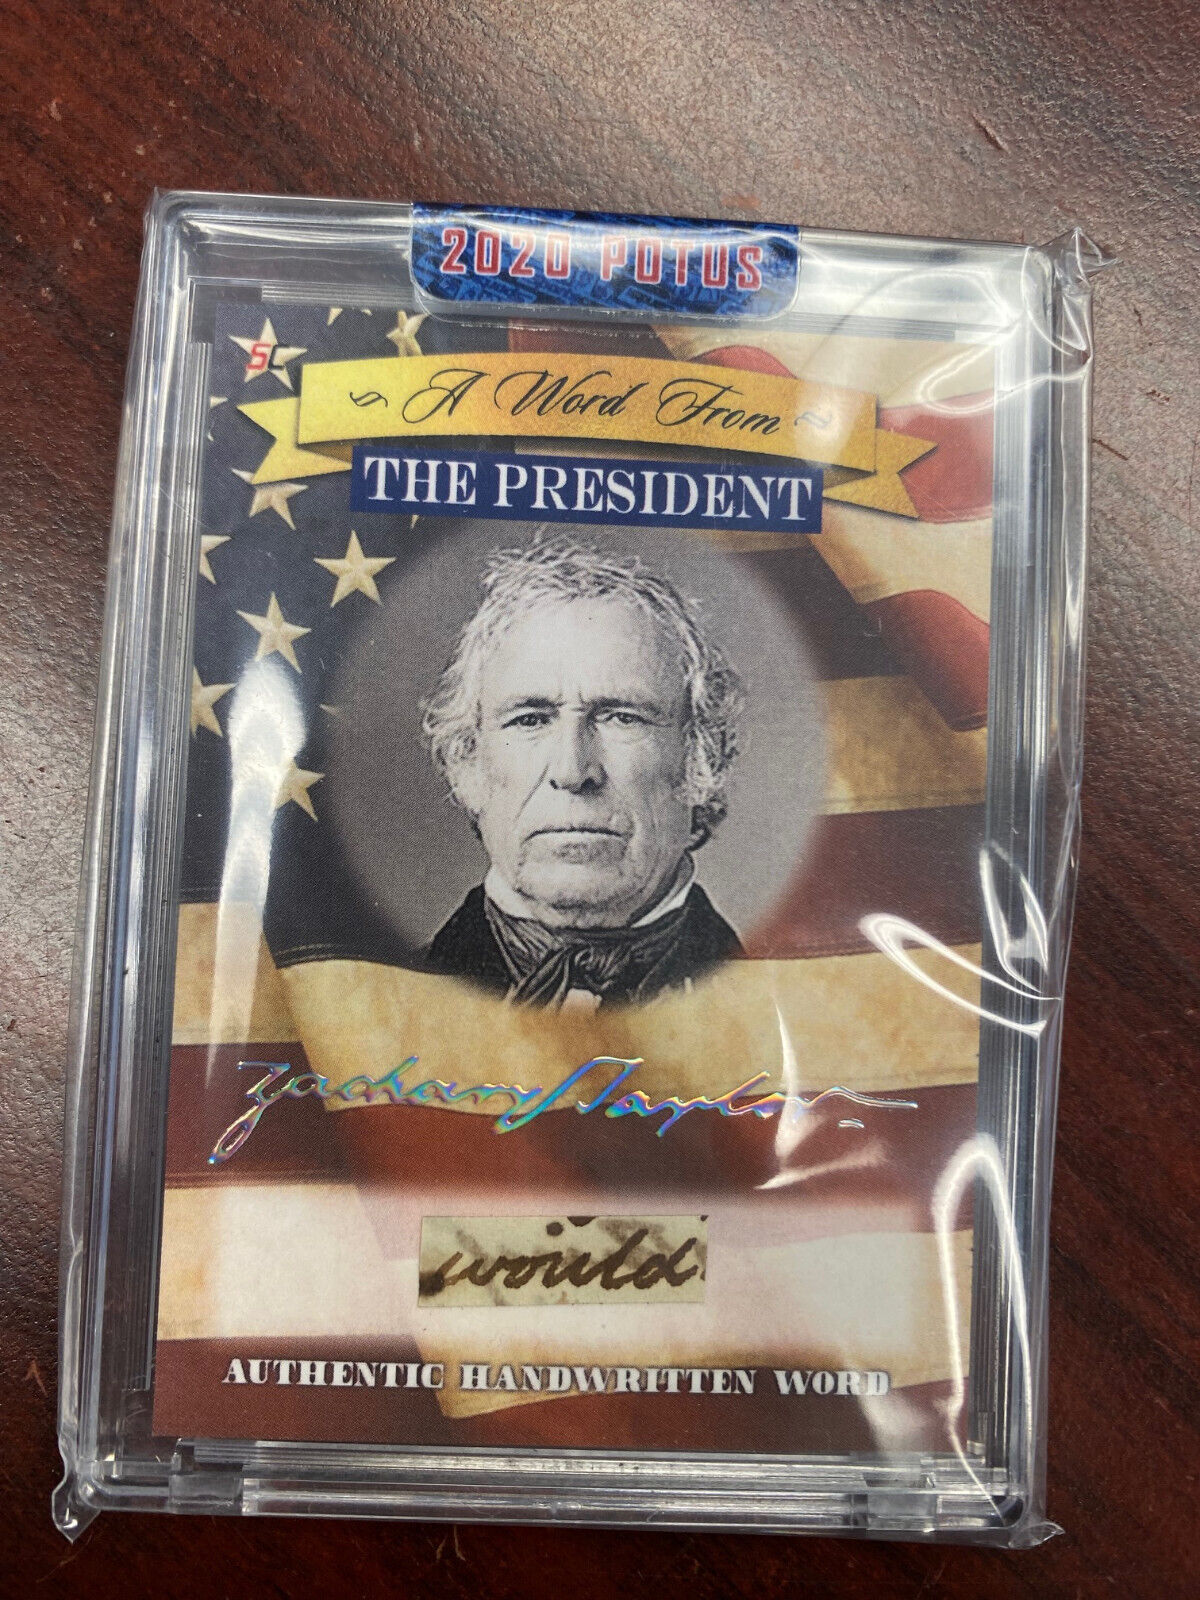 2020 POTUS A WORD FROM THE PRESIDENT ZACHARY TAYLOR HANDWRITTEN WORD